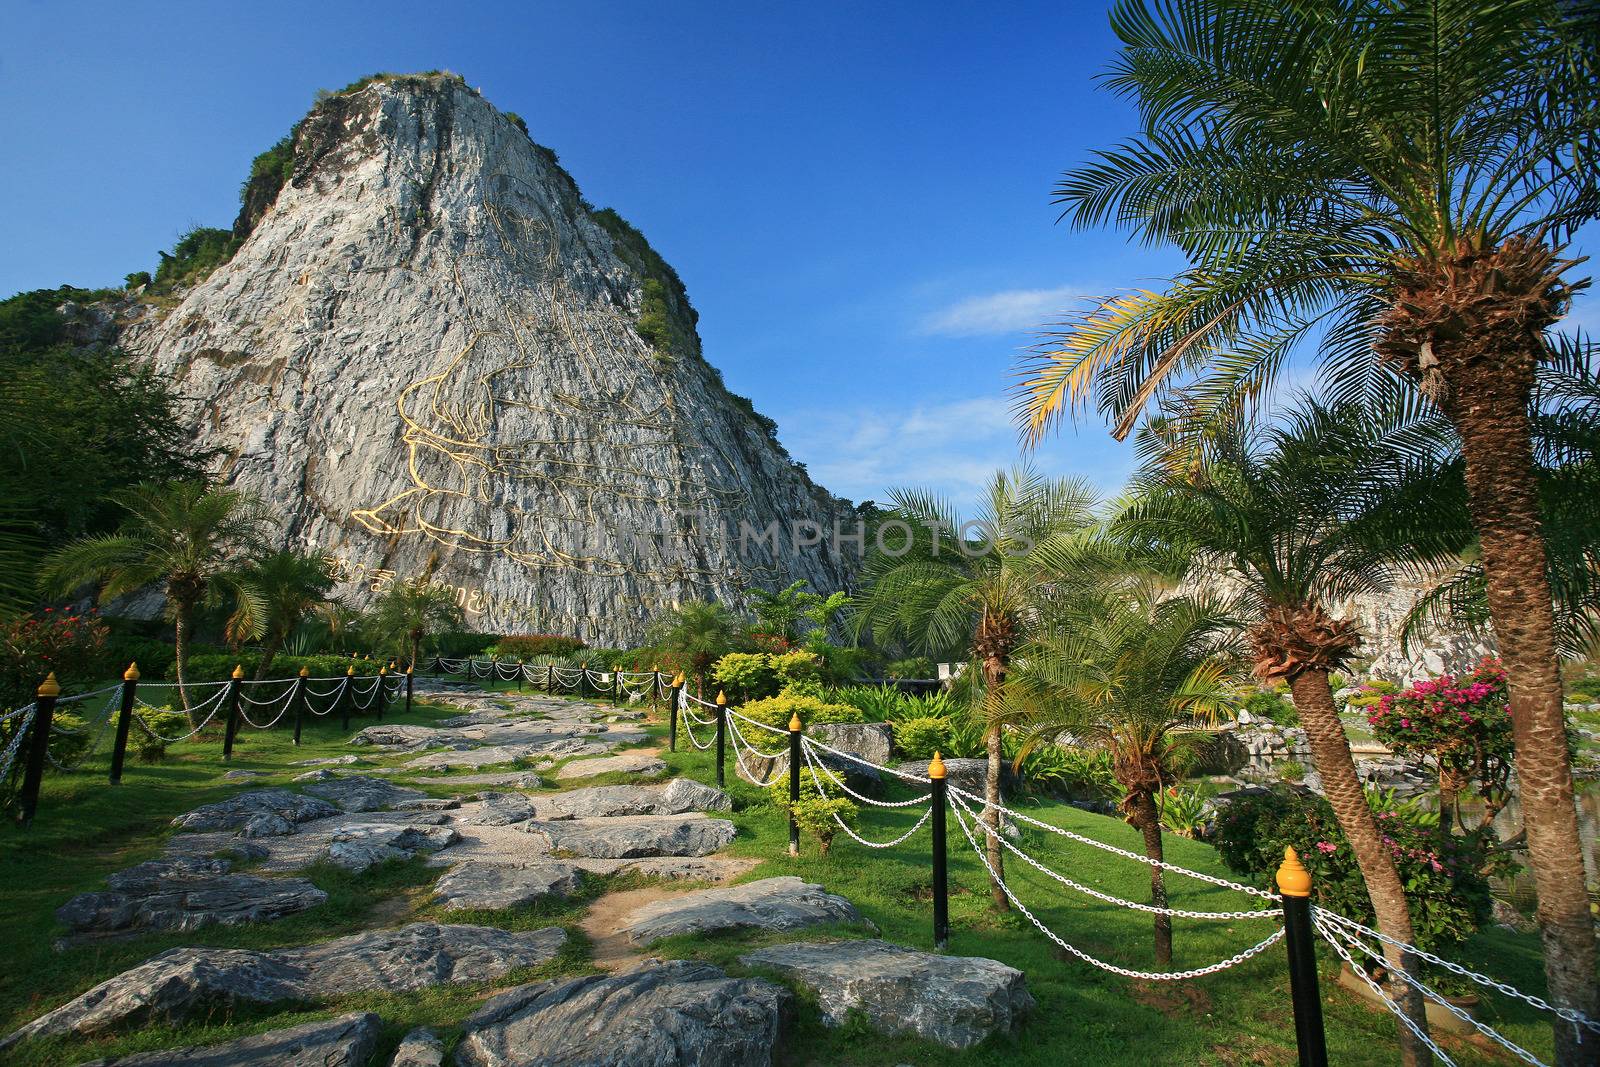 Carved buddha image on the cliff at Khao Chee Jan, Pattaya, Thailand